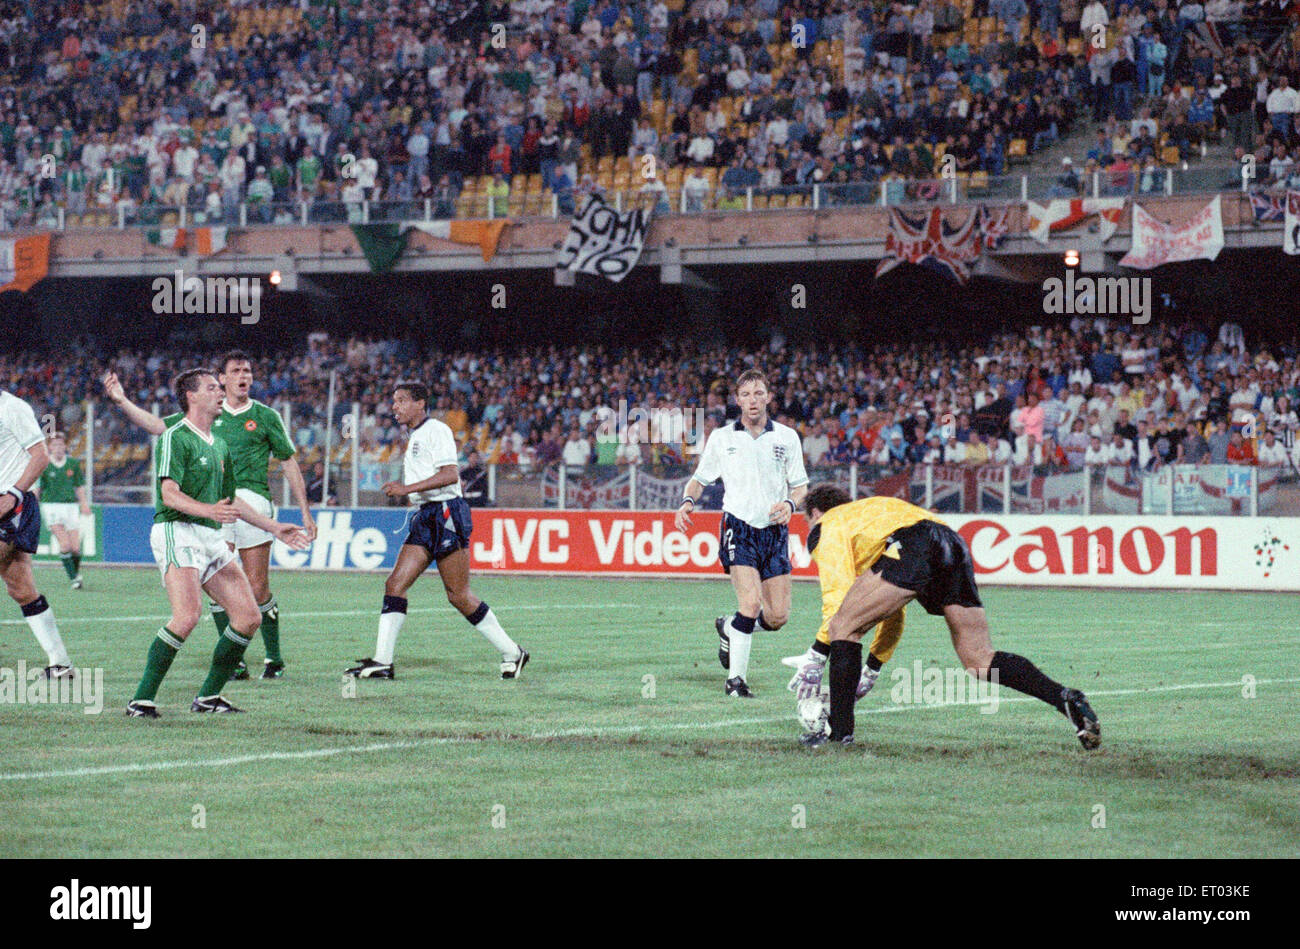 World Cup Group F match at the Stadio Sant'Elia in Cagliari, Italy. England 1 v Republic of Ireland 1. England goalkeeper Peter Shilton picks up the ball in front of Ireland pair Kevin Sheedy and Tony Cascarino. 11th June 1990. Stock Photo